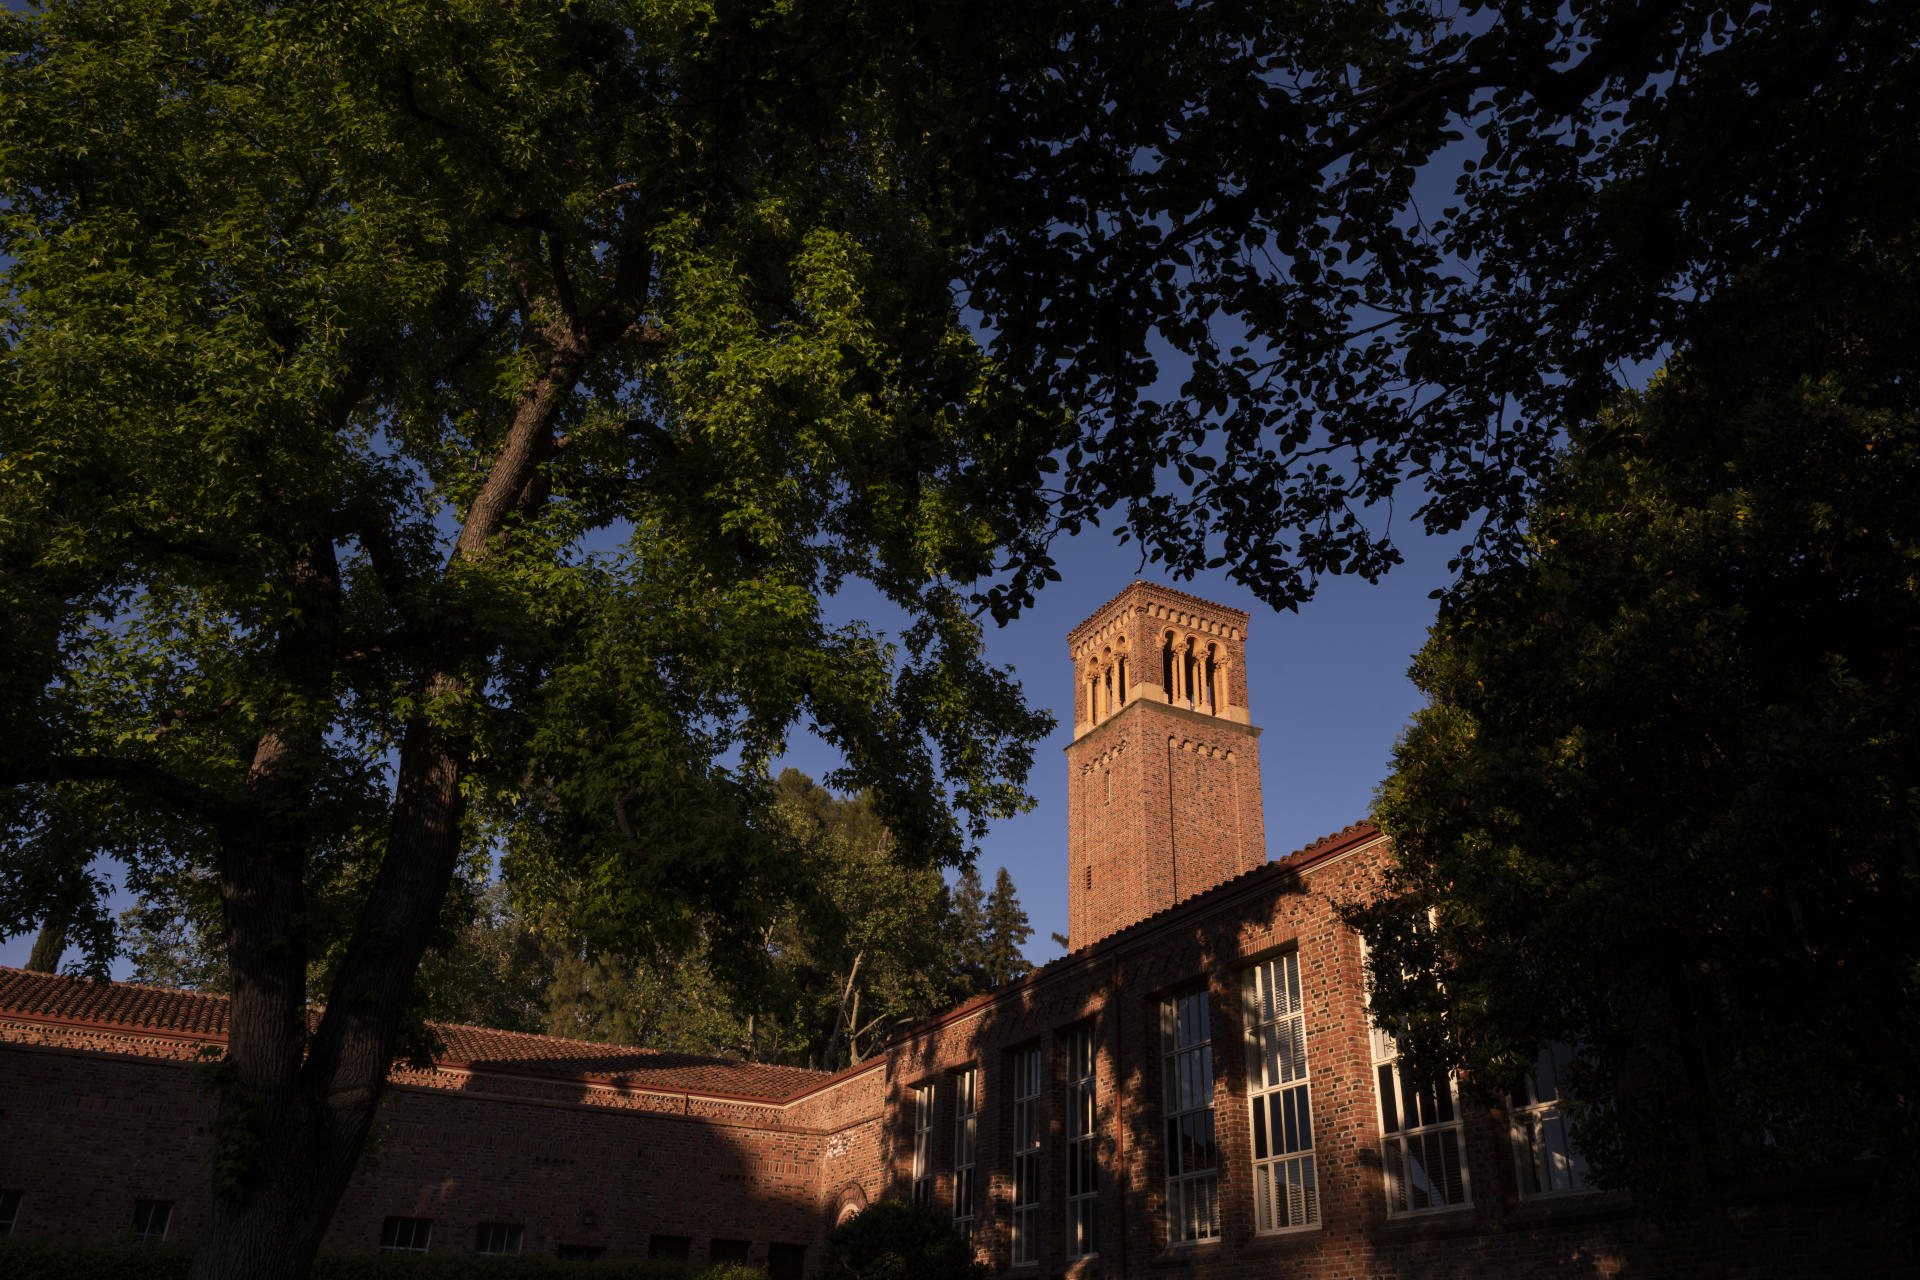 A tall brick building glows in the late afternoon sunshine with trees in the foreground.